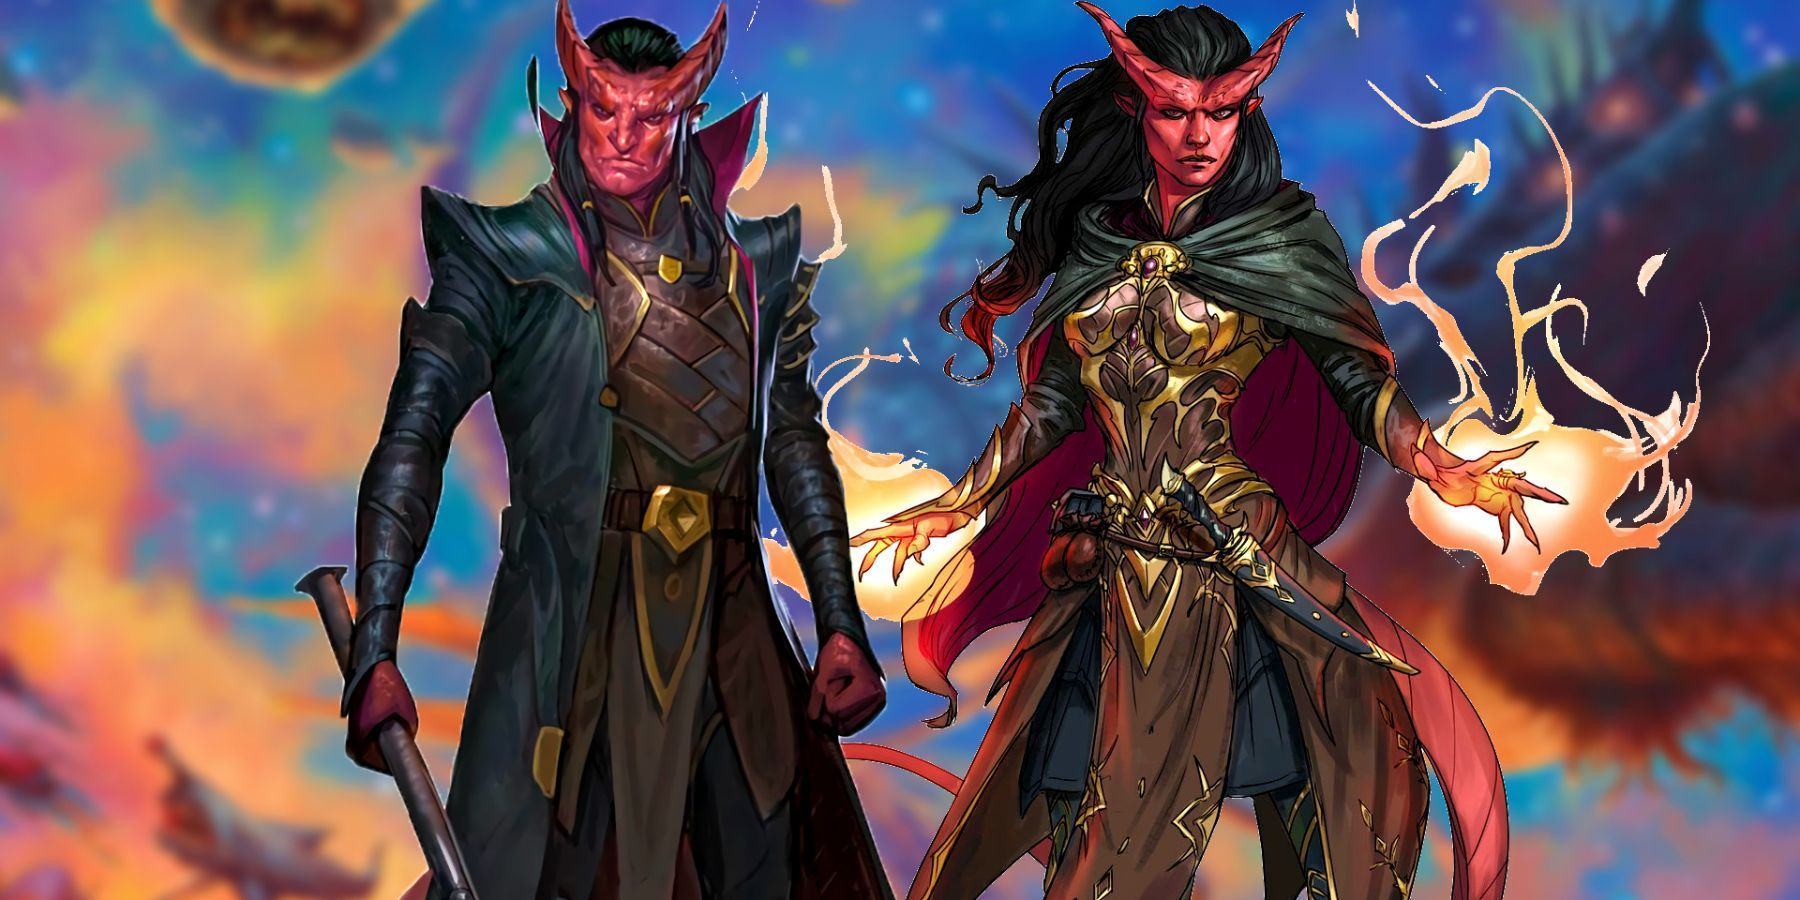 Two infernal red tieflings in front of a blurred Spelljammer background. The one on the left wields a mace in one hand, while the one on the right is conjuring fireballs in both hands.